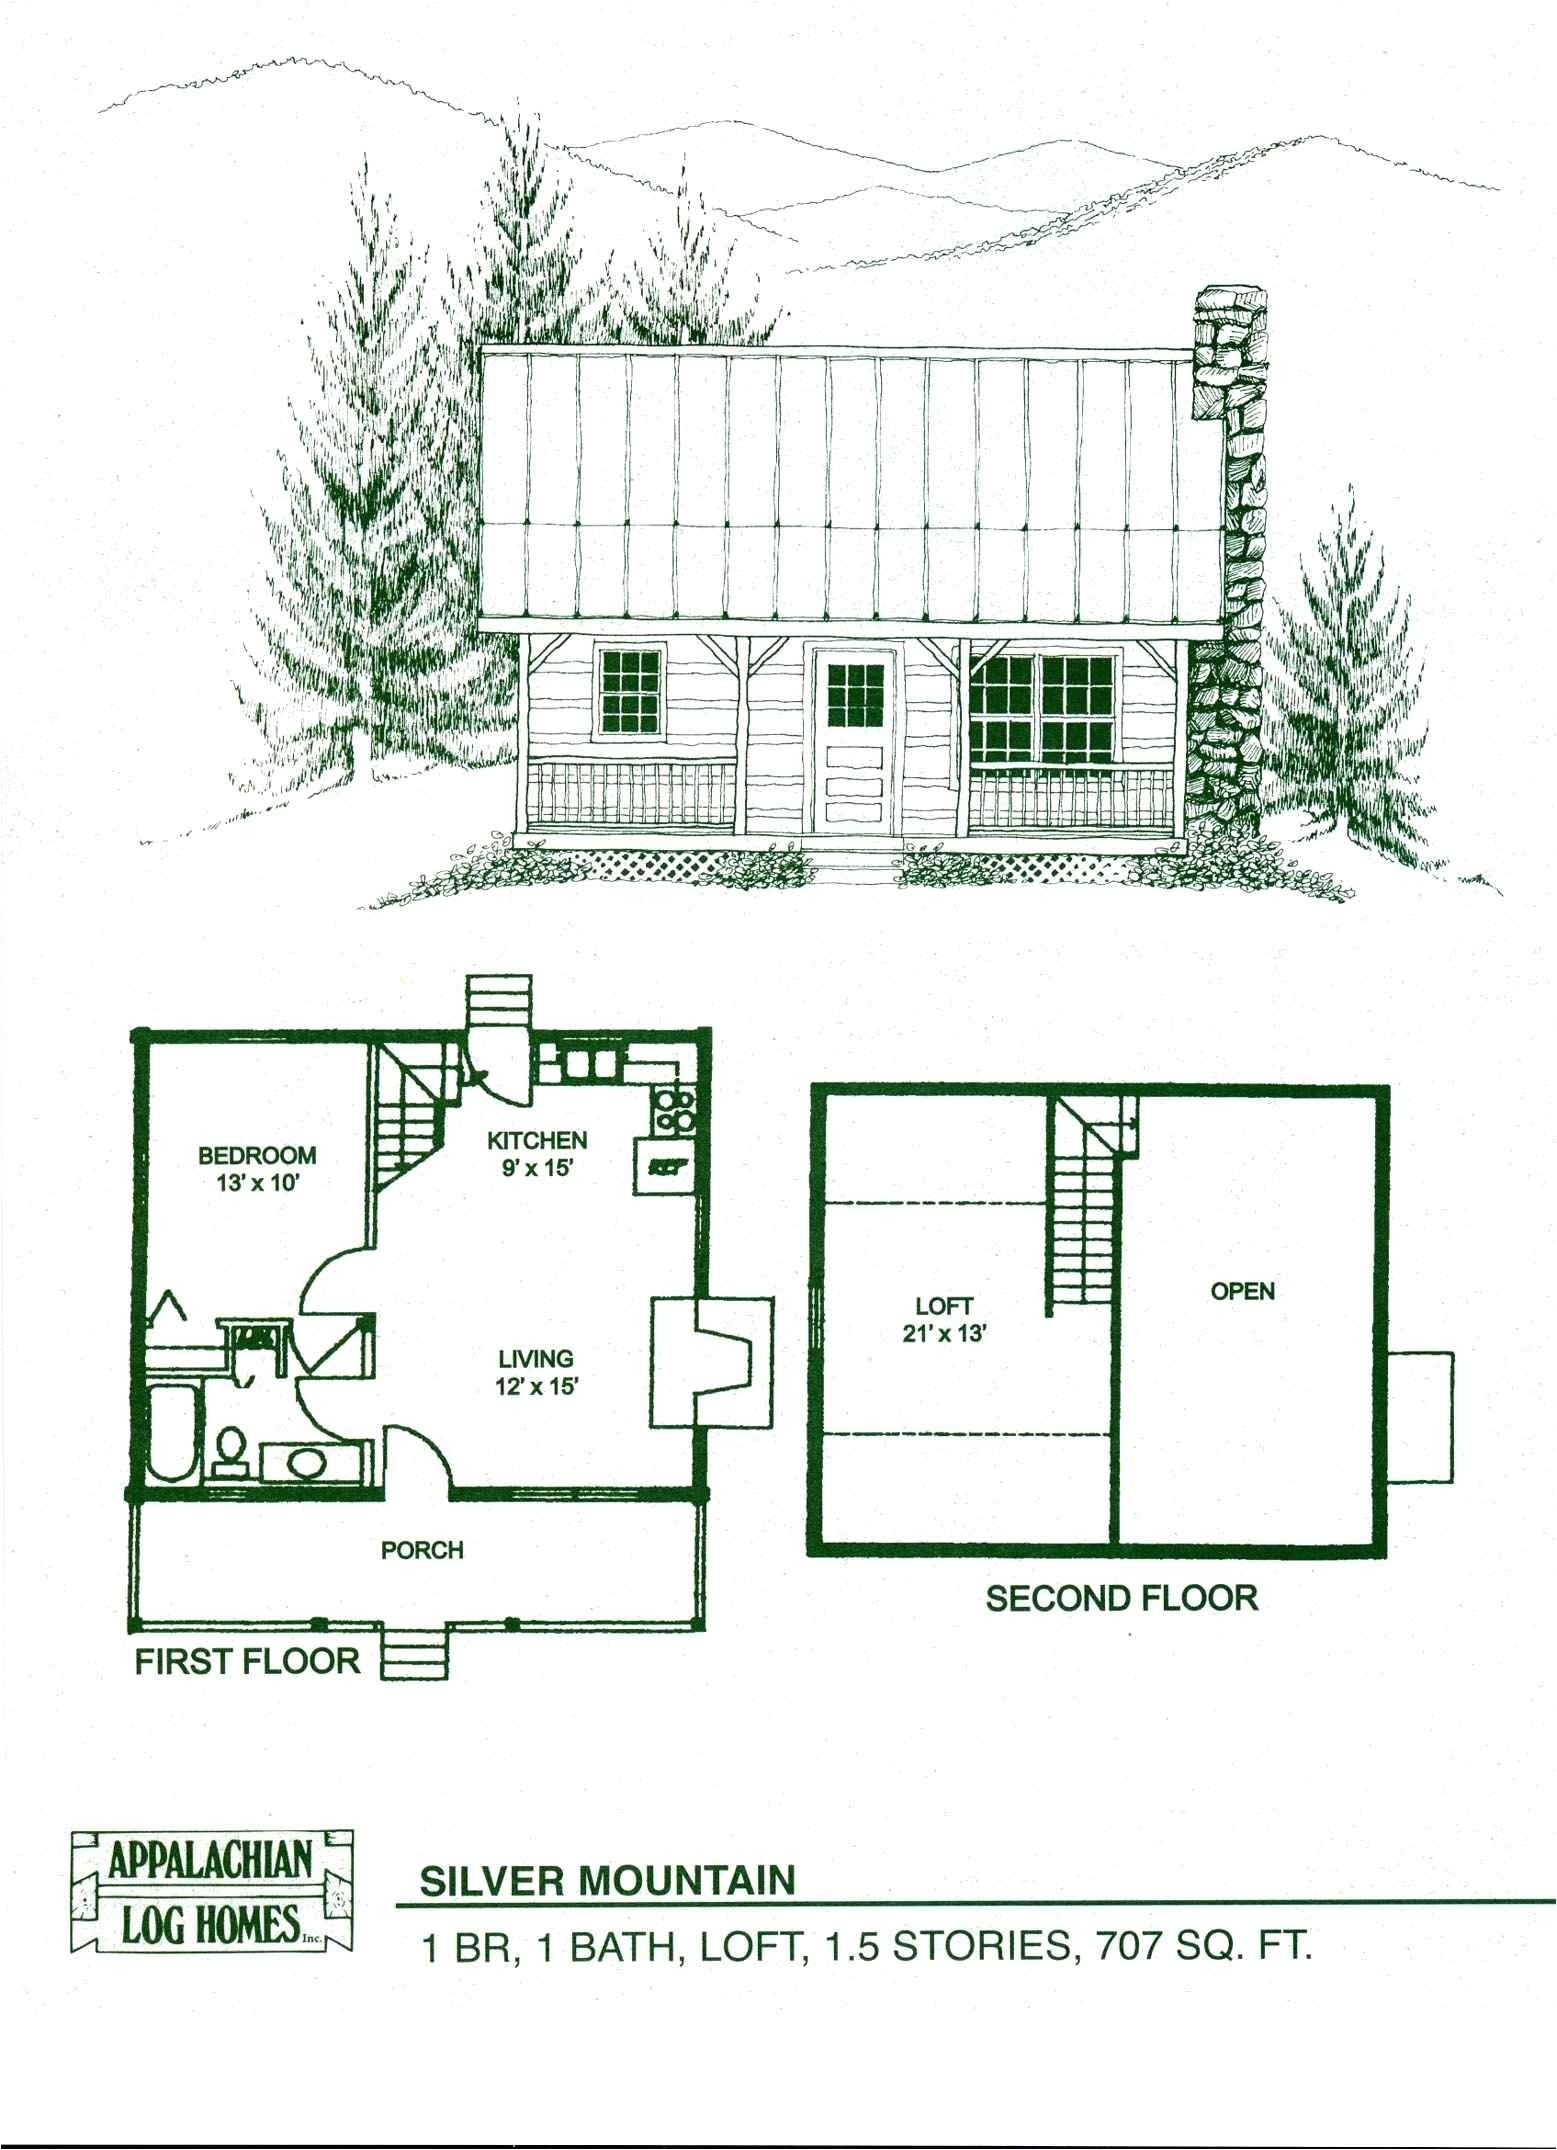 16 x 20 cabin plans small cabin home plans new free tiny house plans free small